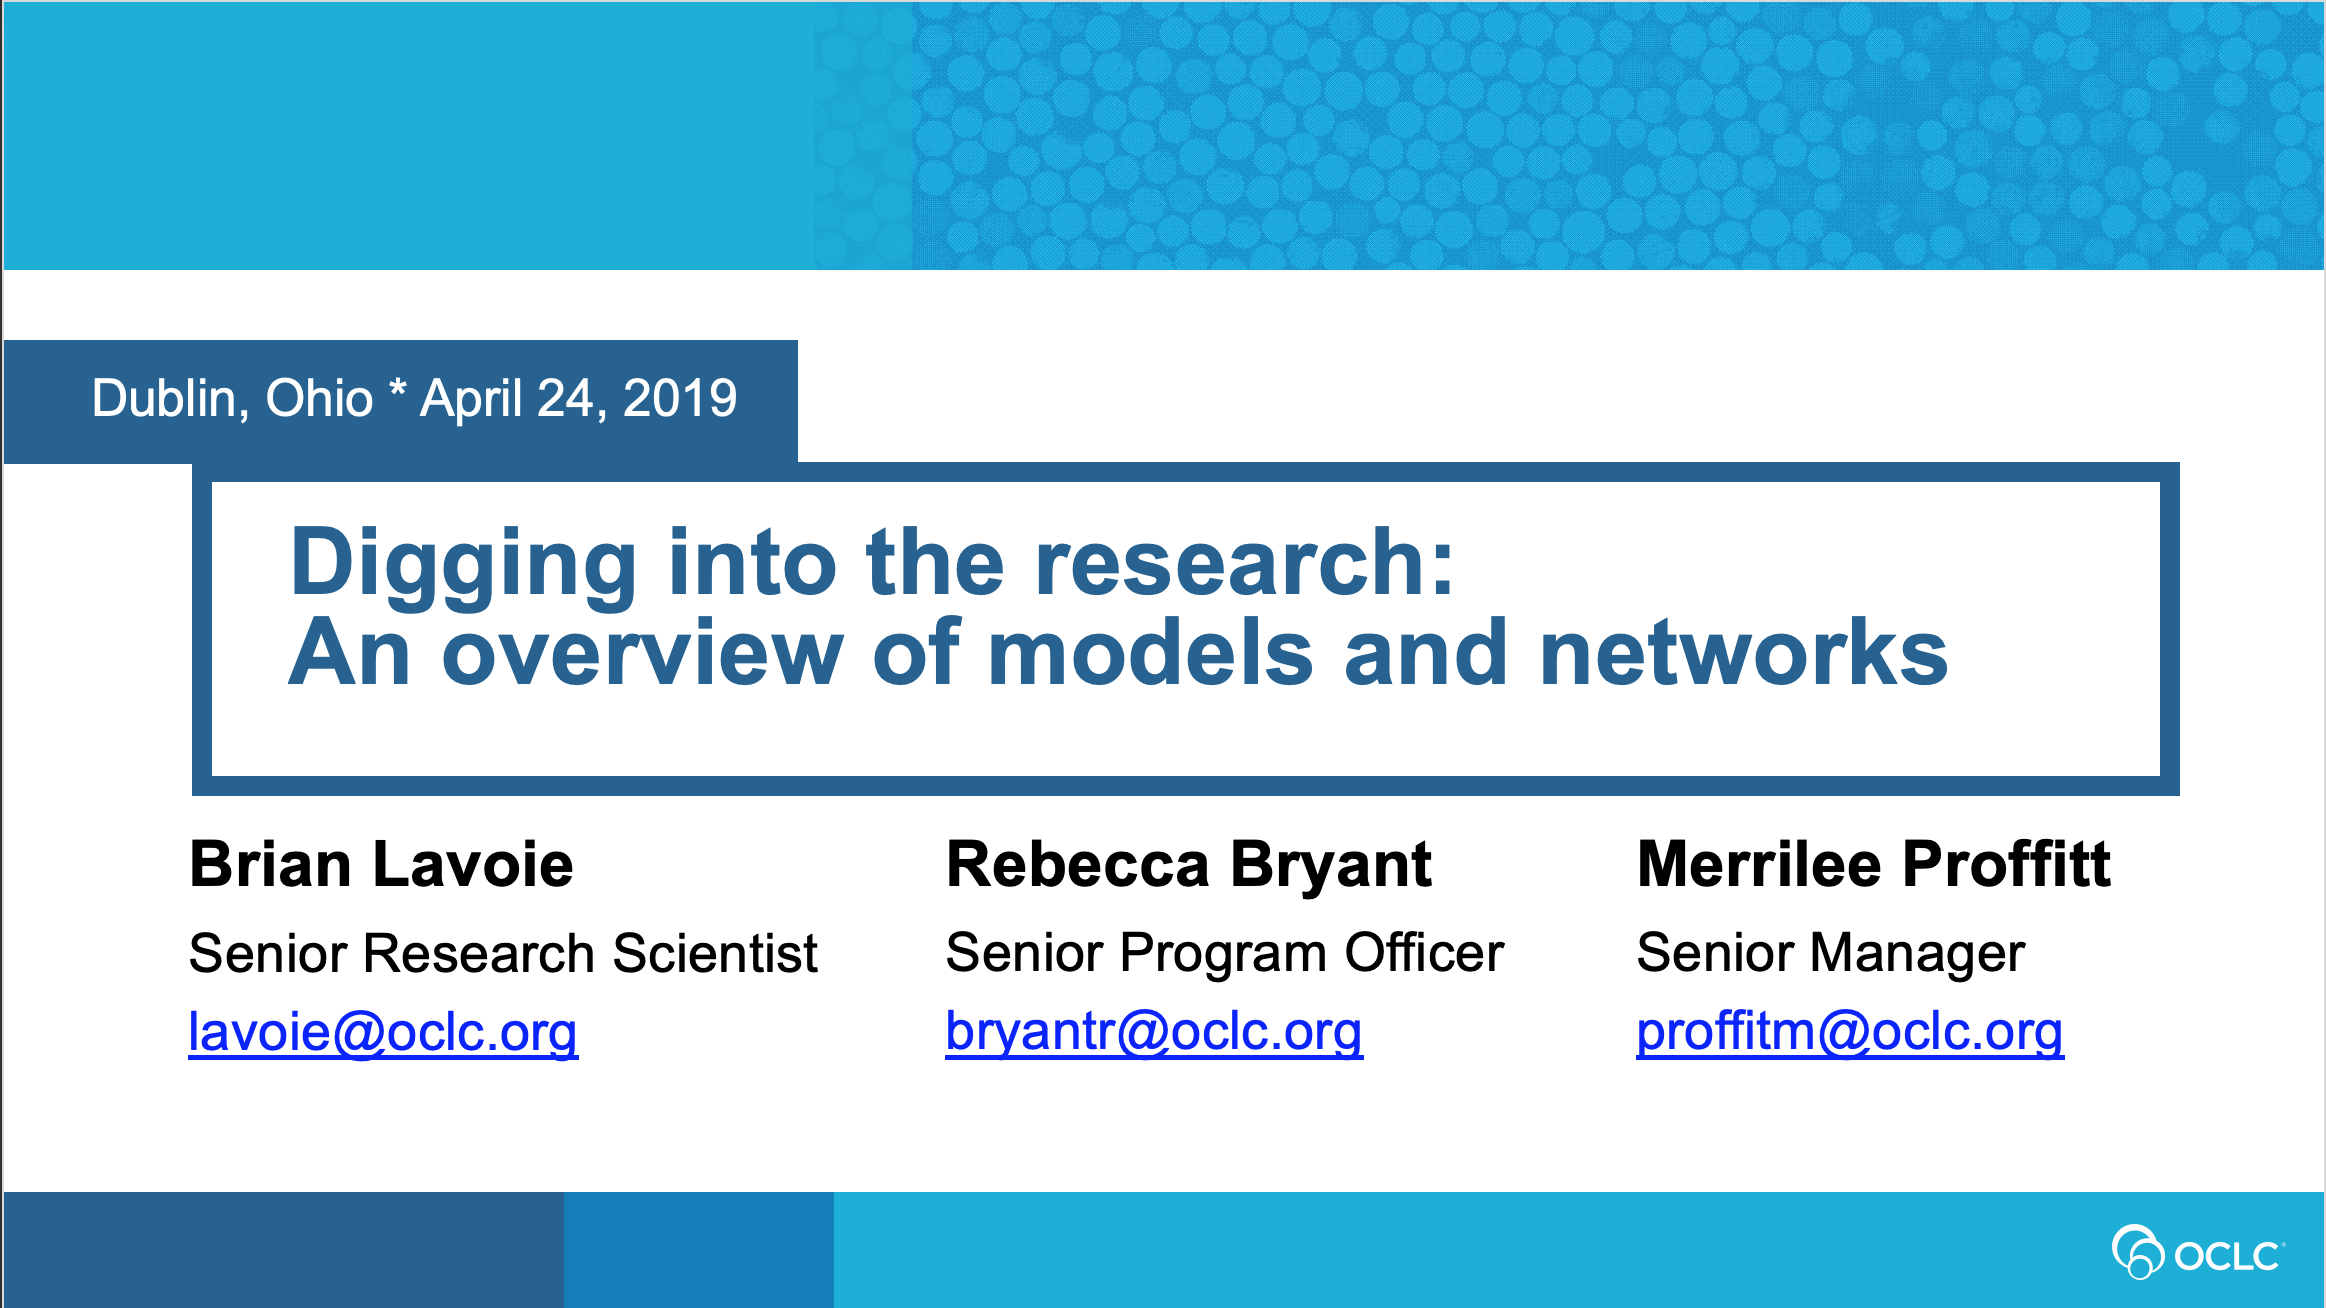 Digging into the Research: An Overview of Models and Networks